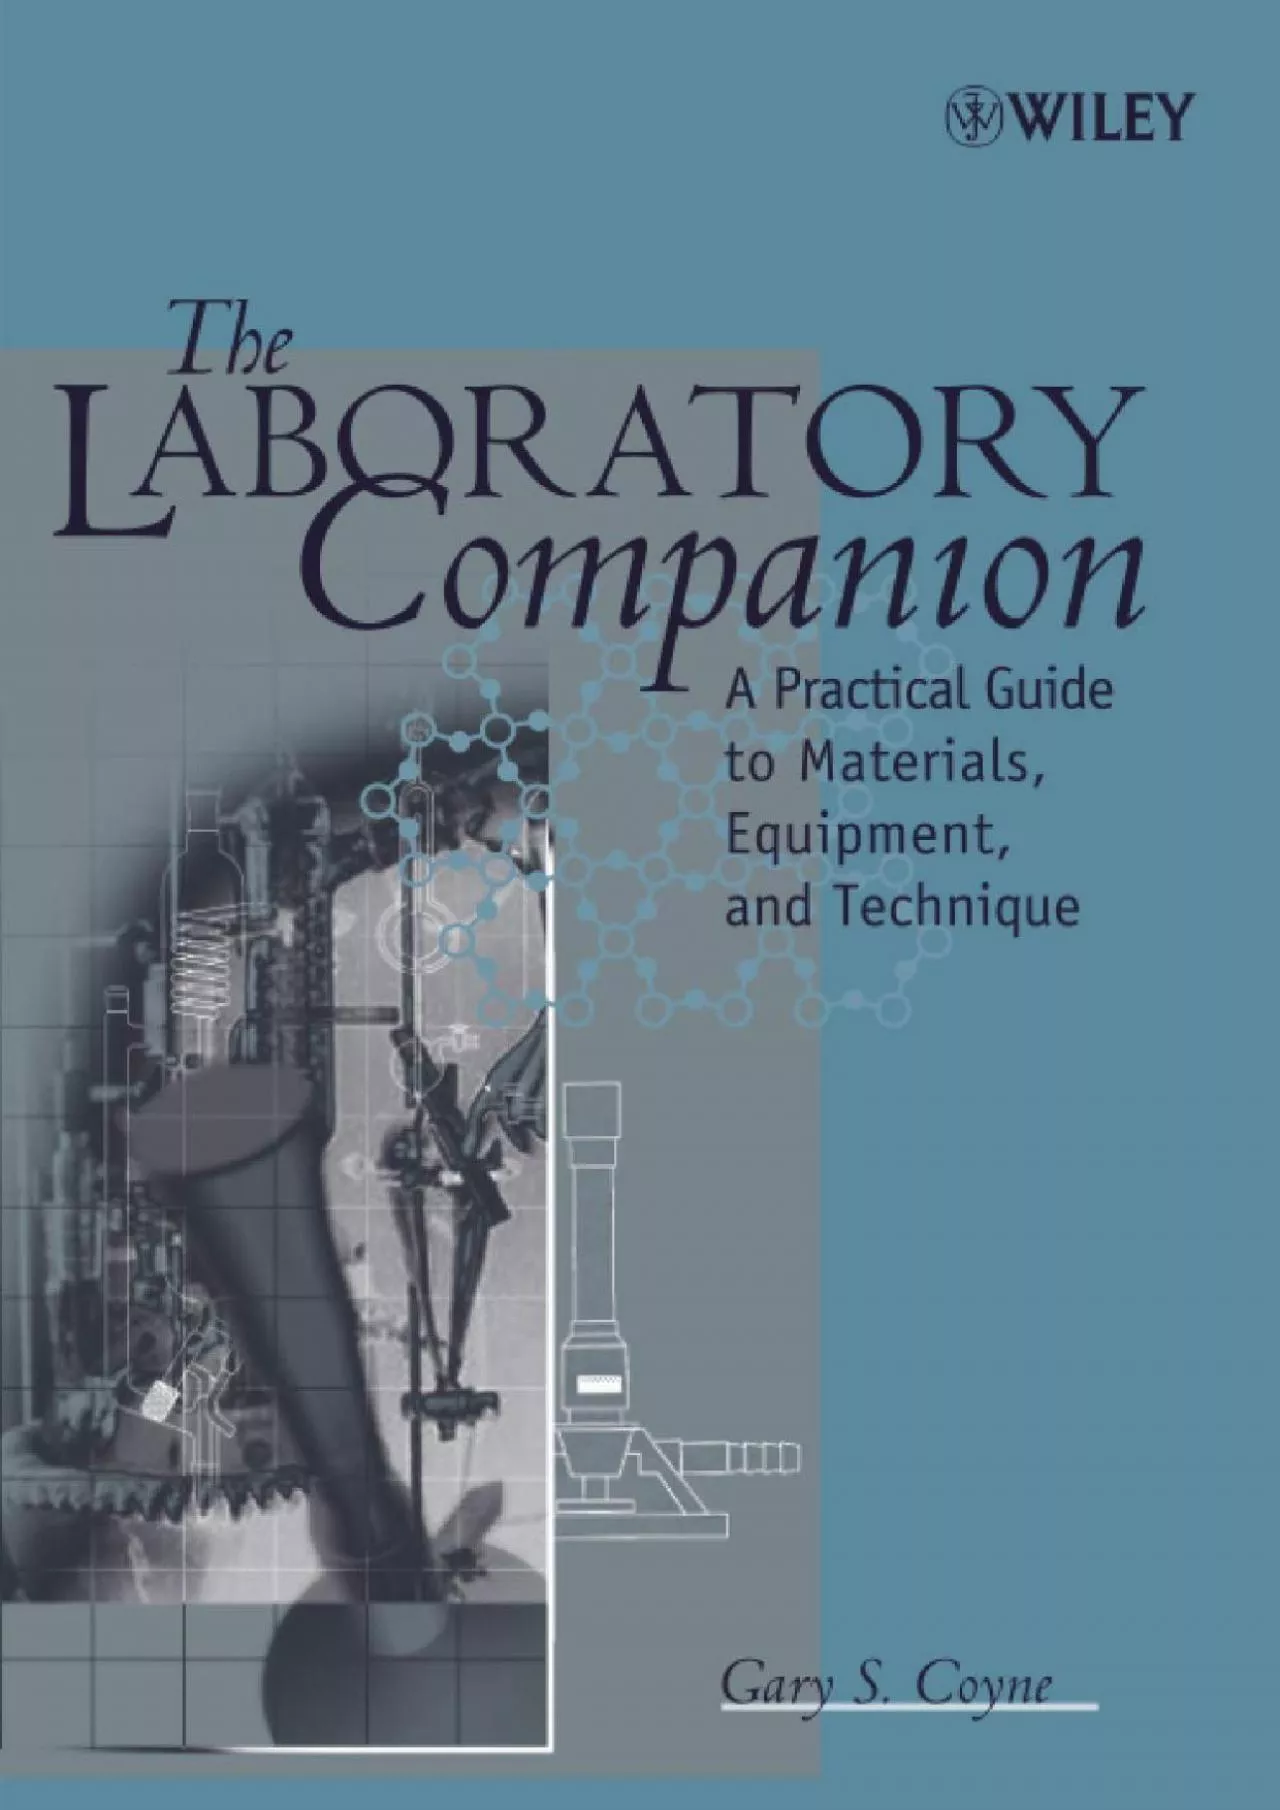 (BOOK)-The Laboratory Companion: A Practical Guide to Materials, Equipment, and Technique